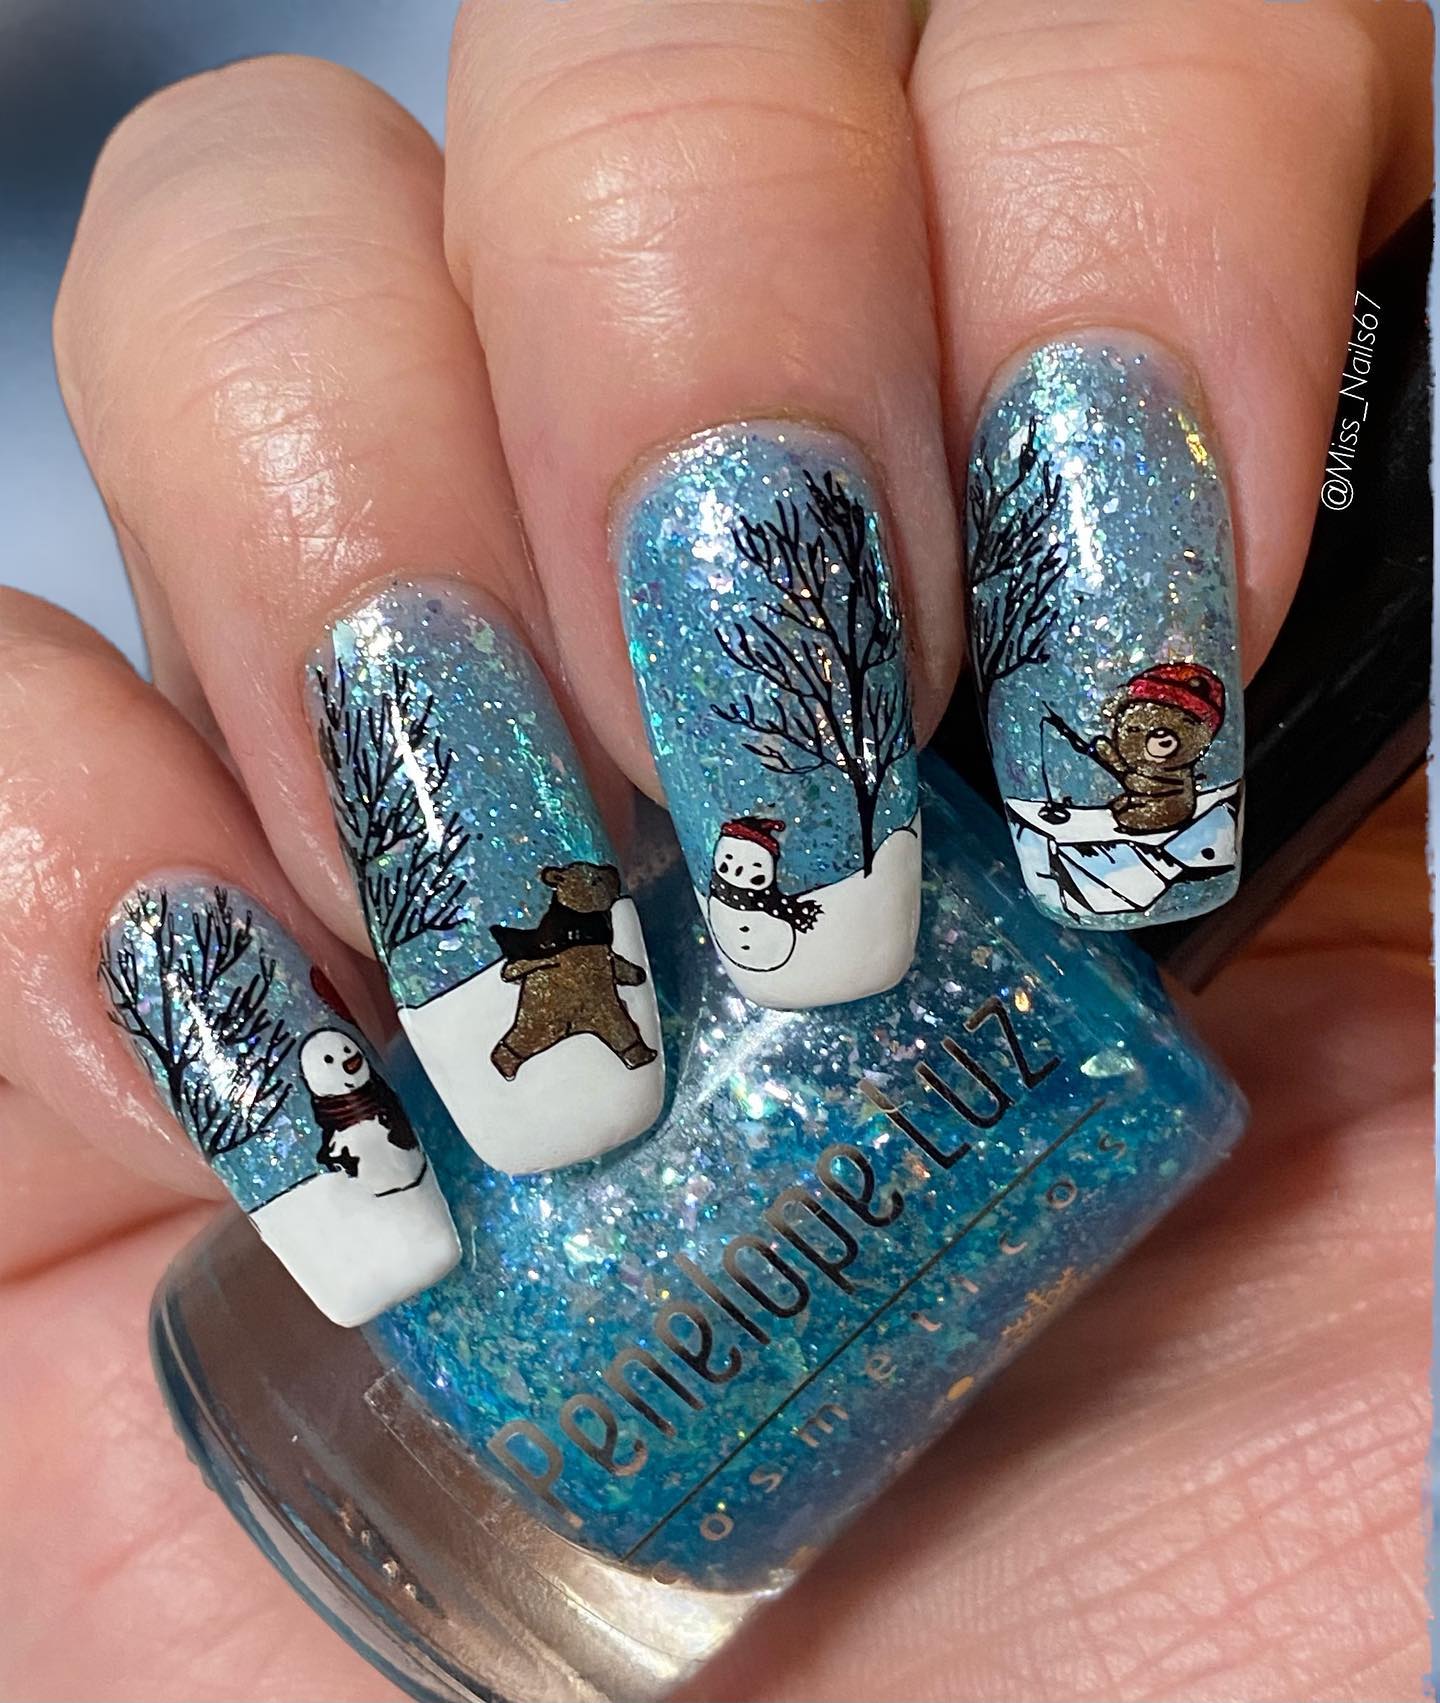 Winter nail ideas cannot be listed without a snowman. So, here is a nice one above. There are also bears in this nail design. 